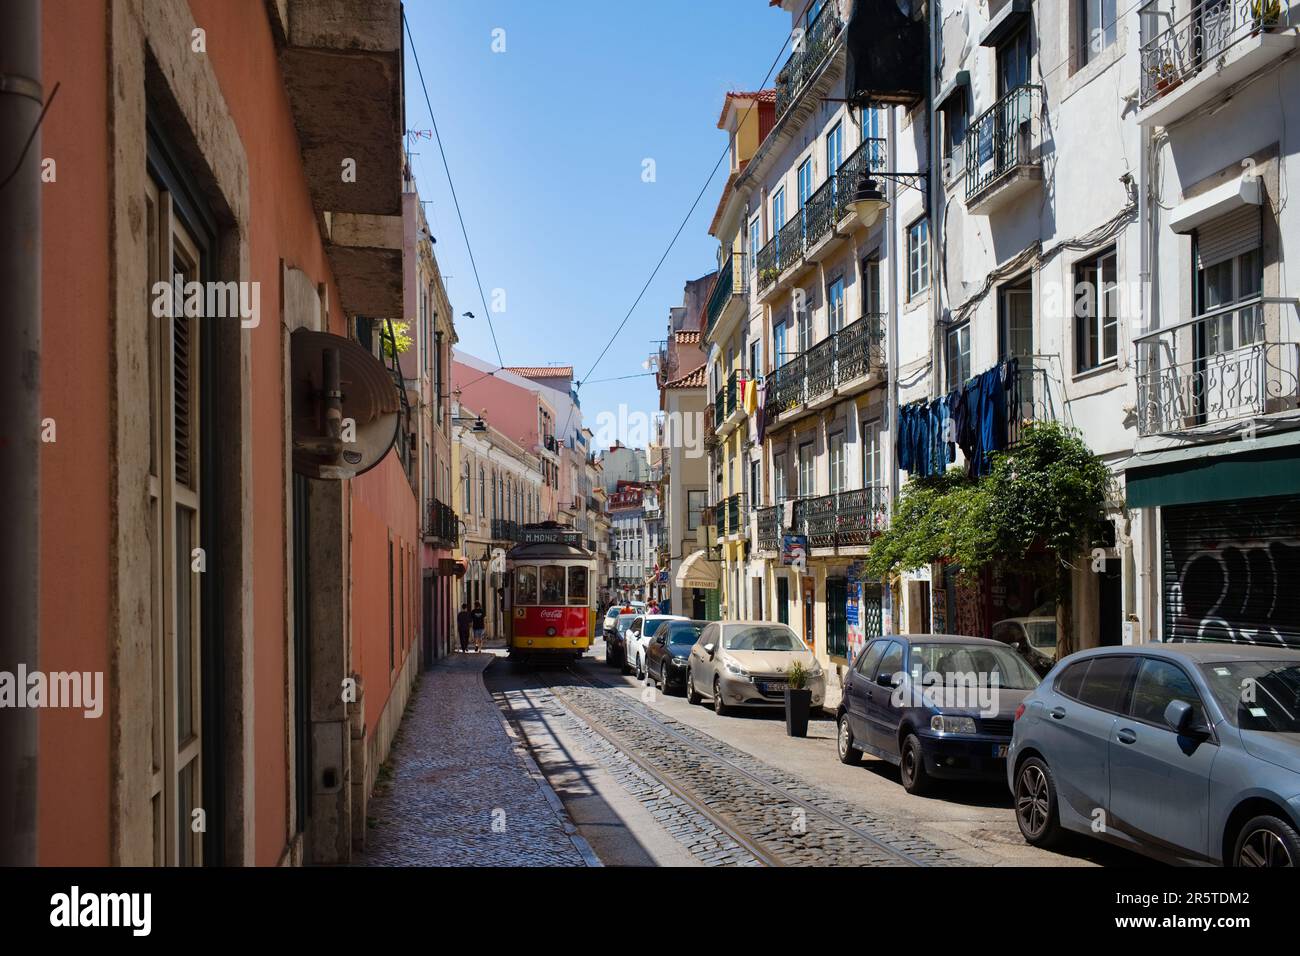 Number 28E tram travelling through the narrow streets of Lisbon Stock Photo